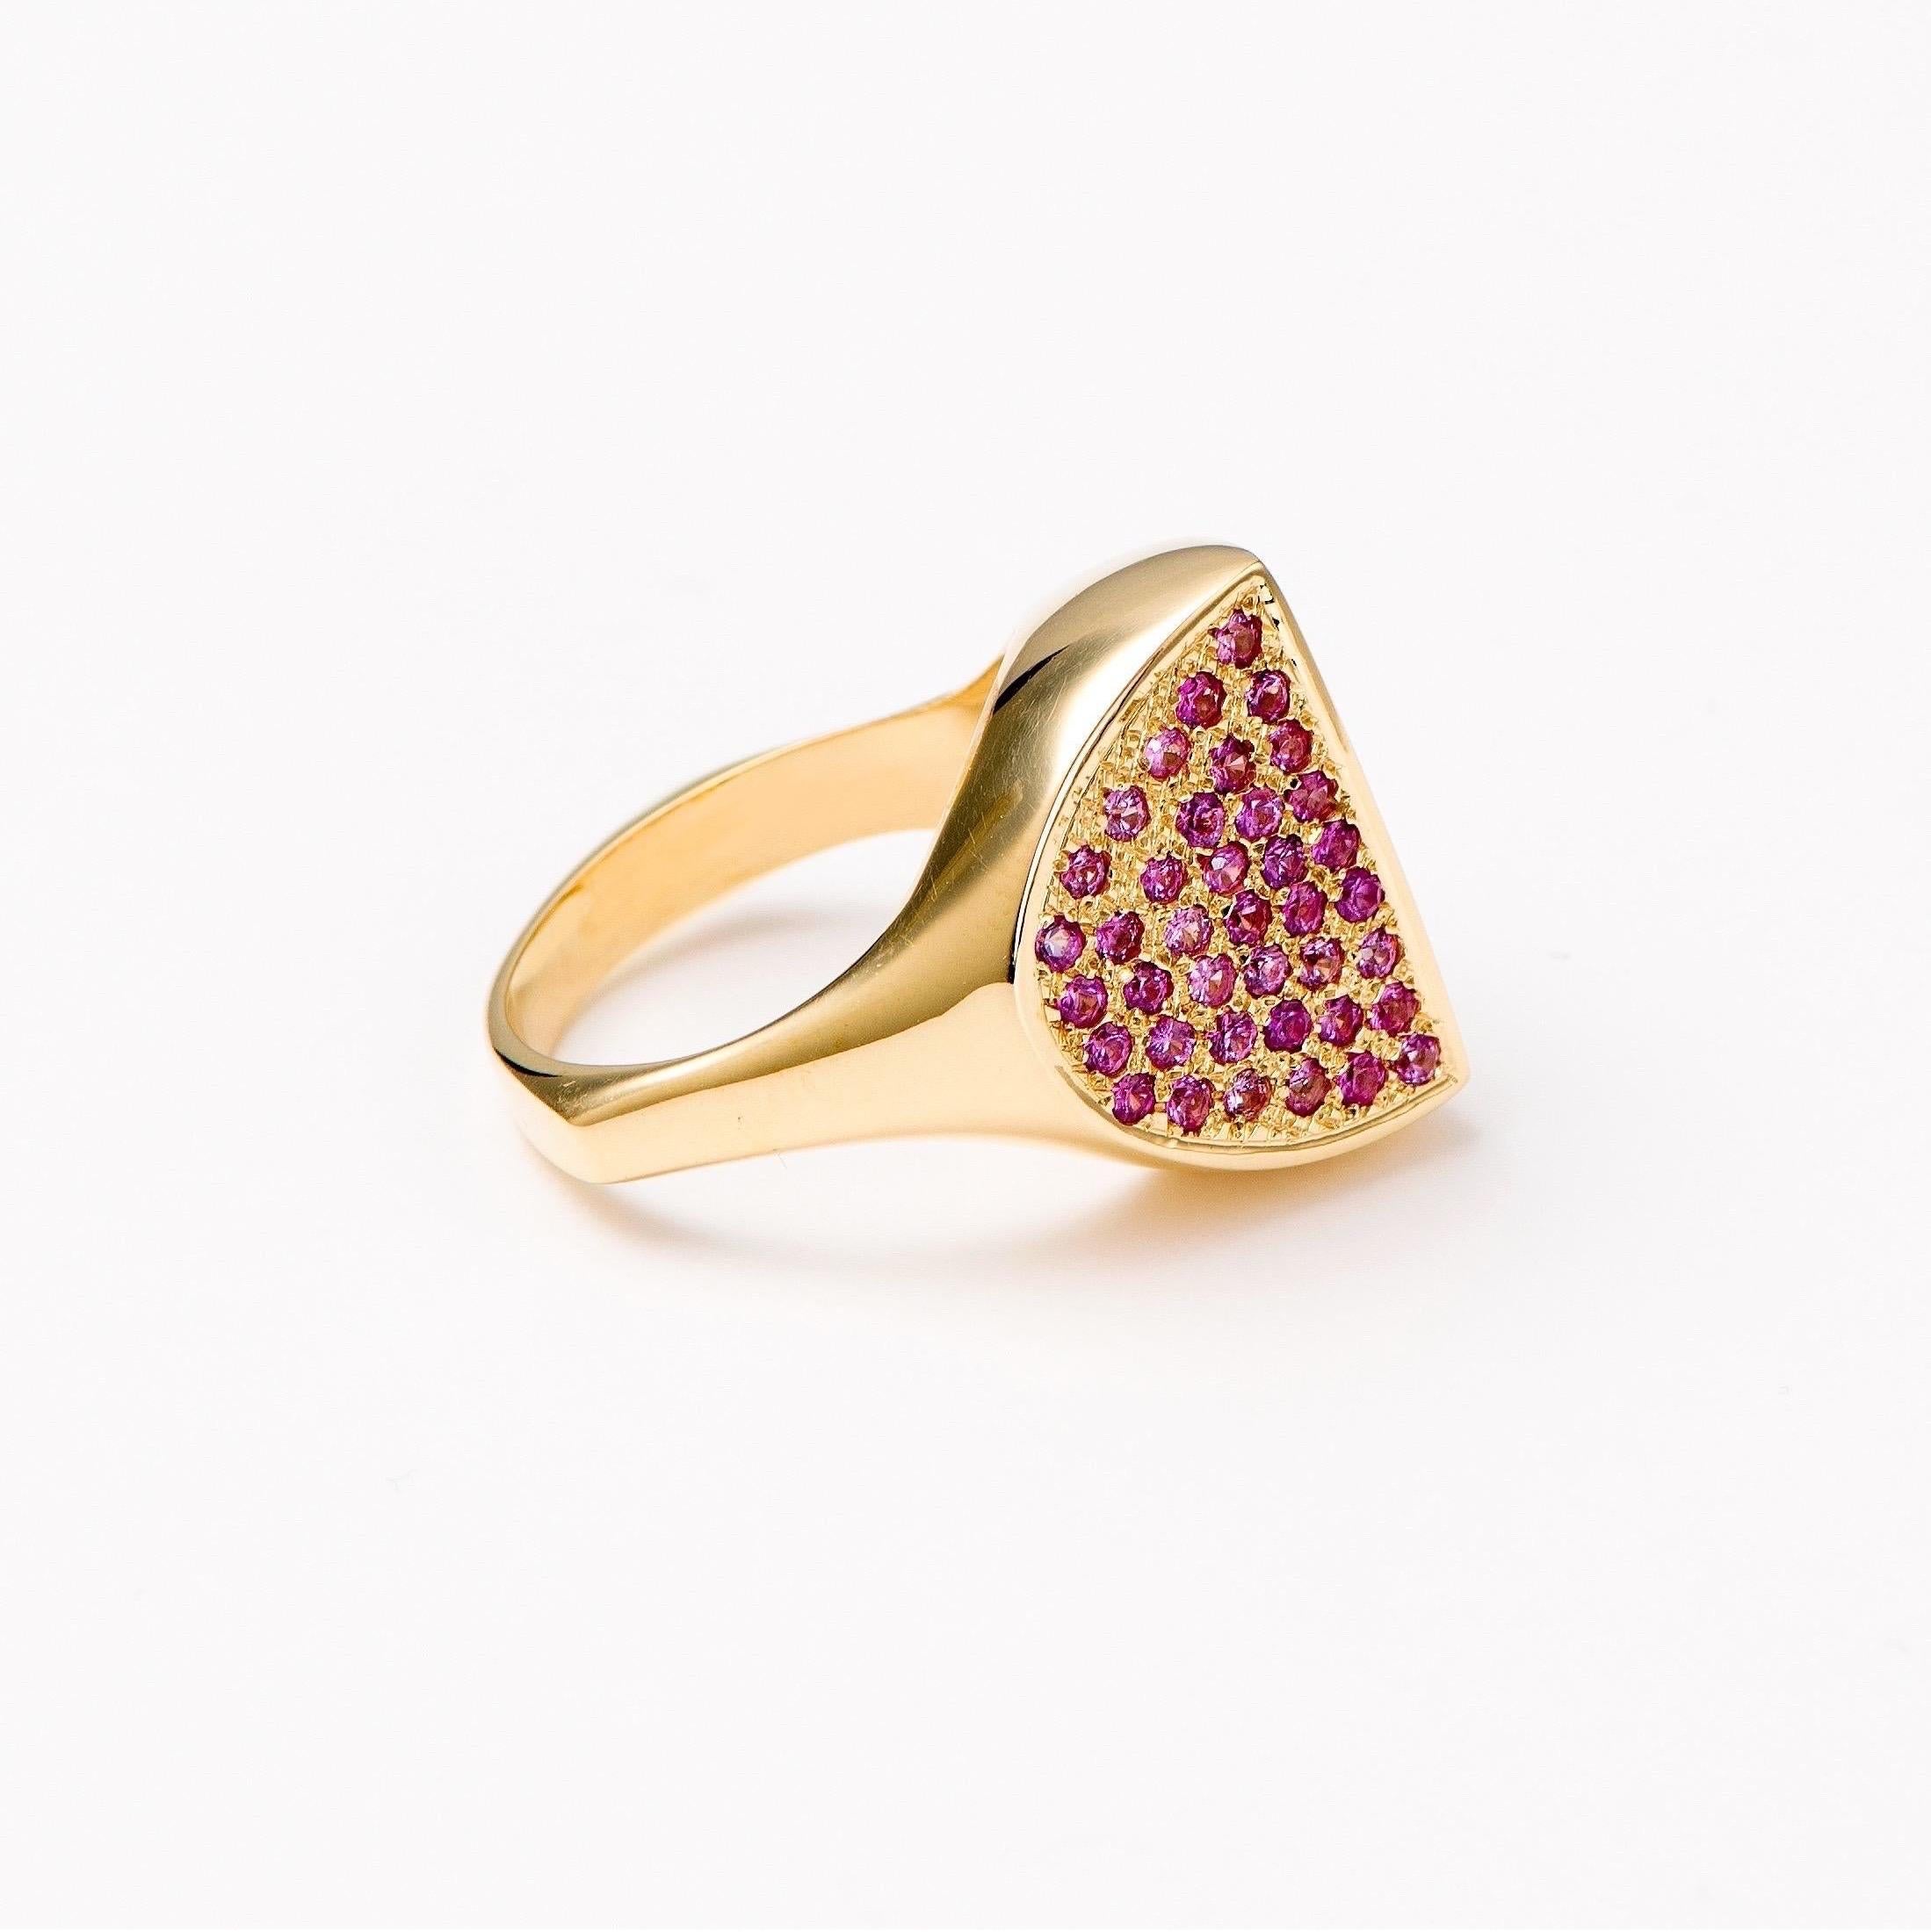 The ‘Right angle’ ring is hand sculpted and crafted in 18K gold, hallmarked in Cyprus. This impressive, statement ring comes in a highly polished finish and features Pink Sapphires, 0,79 Cts and Tanzanites 0,74 Cts. The ‘Right angle’ ring is a